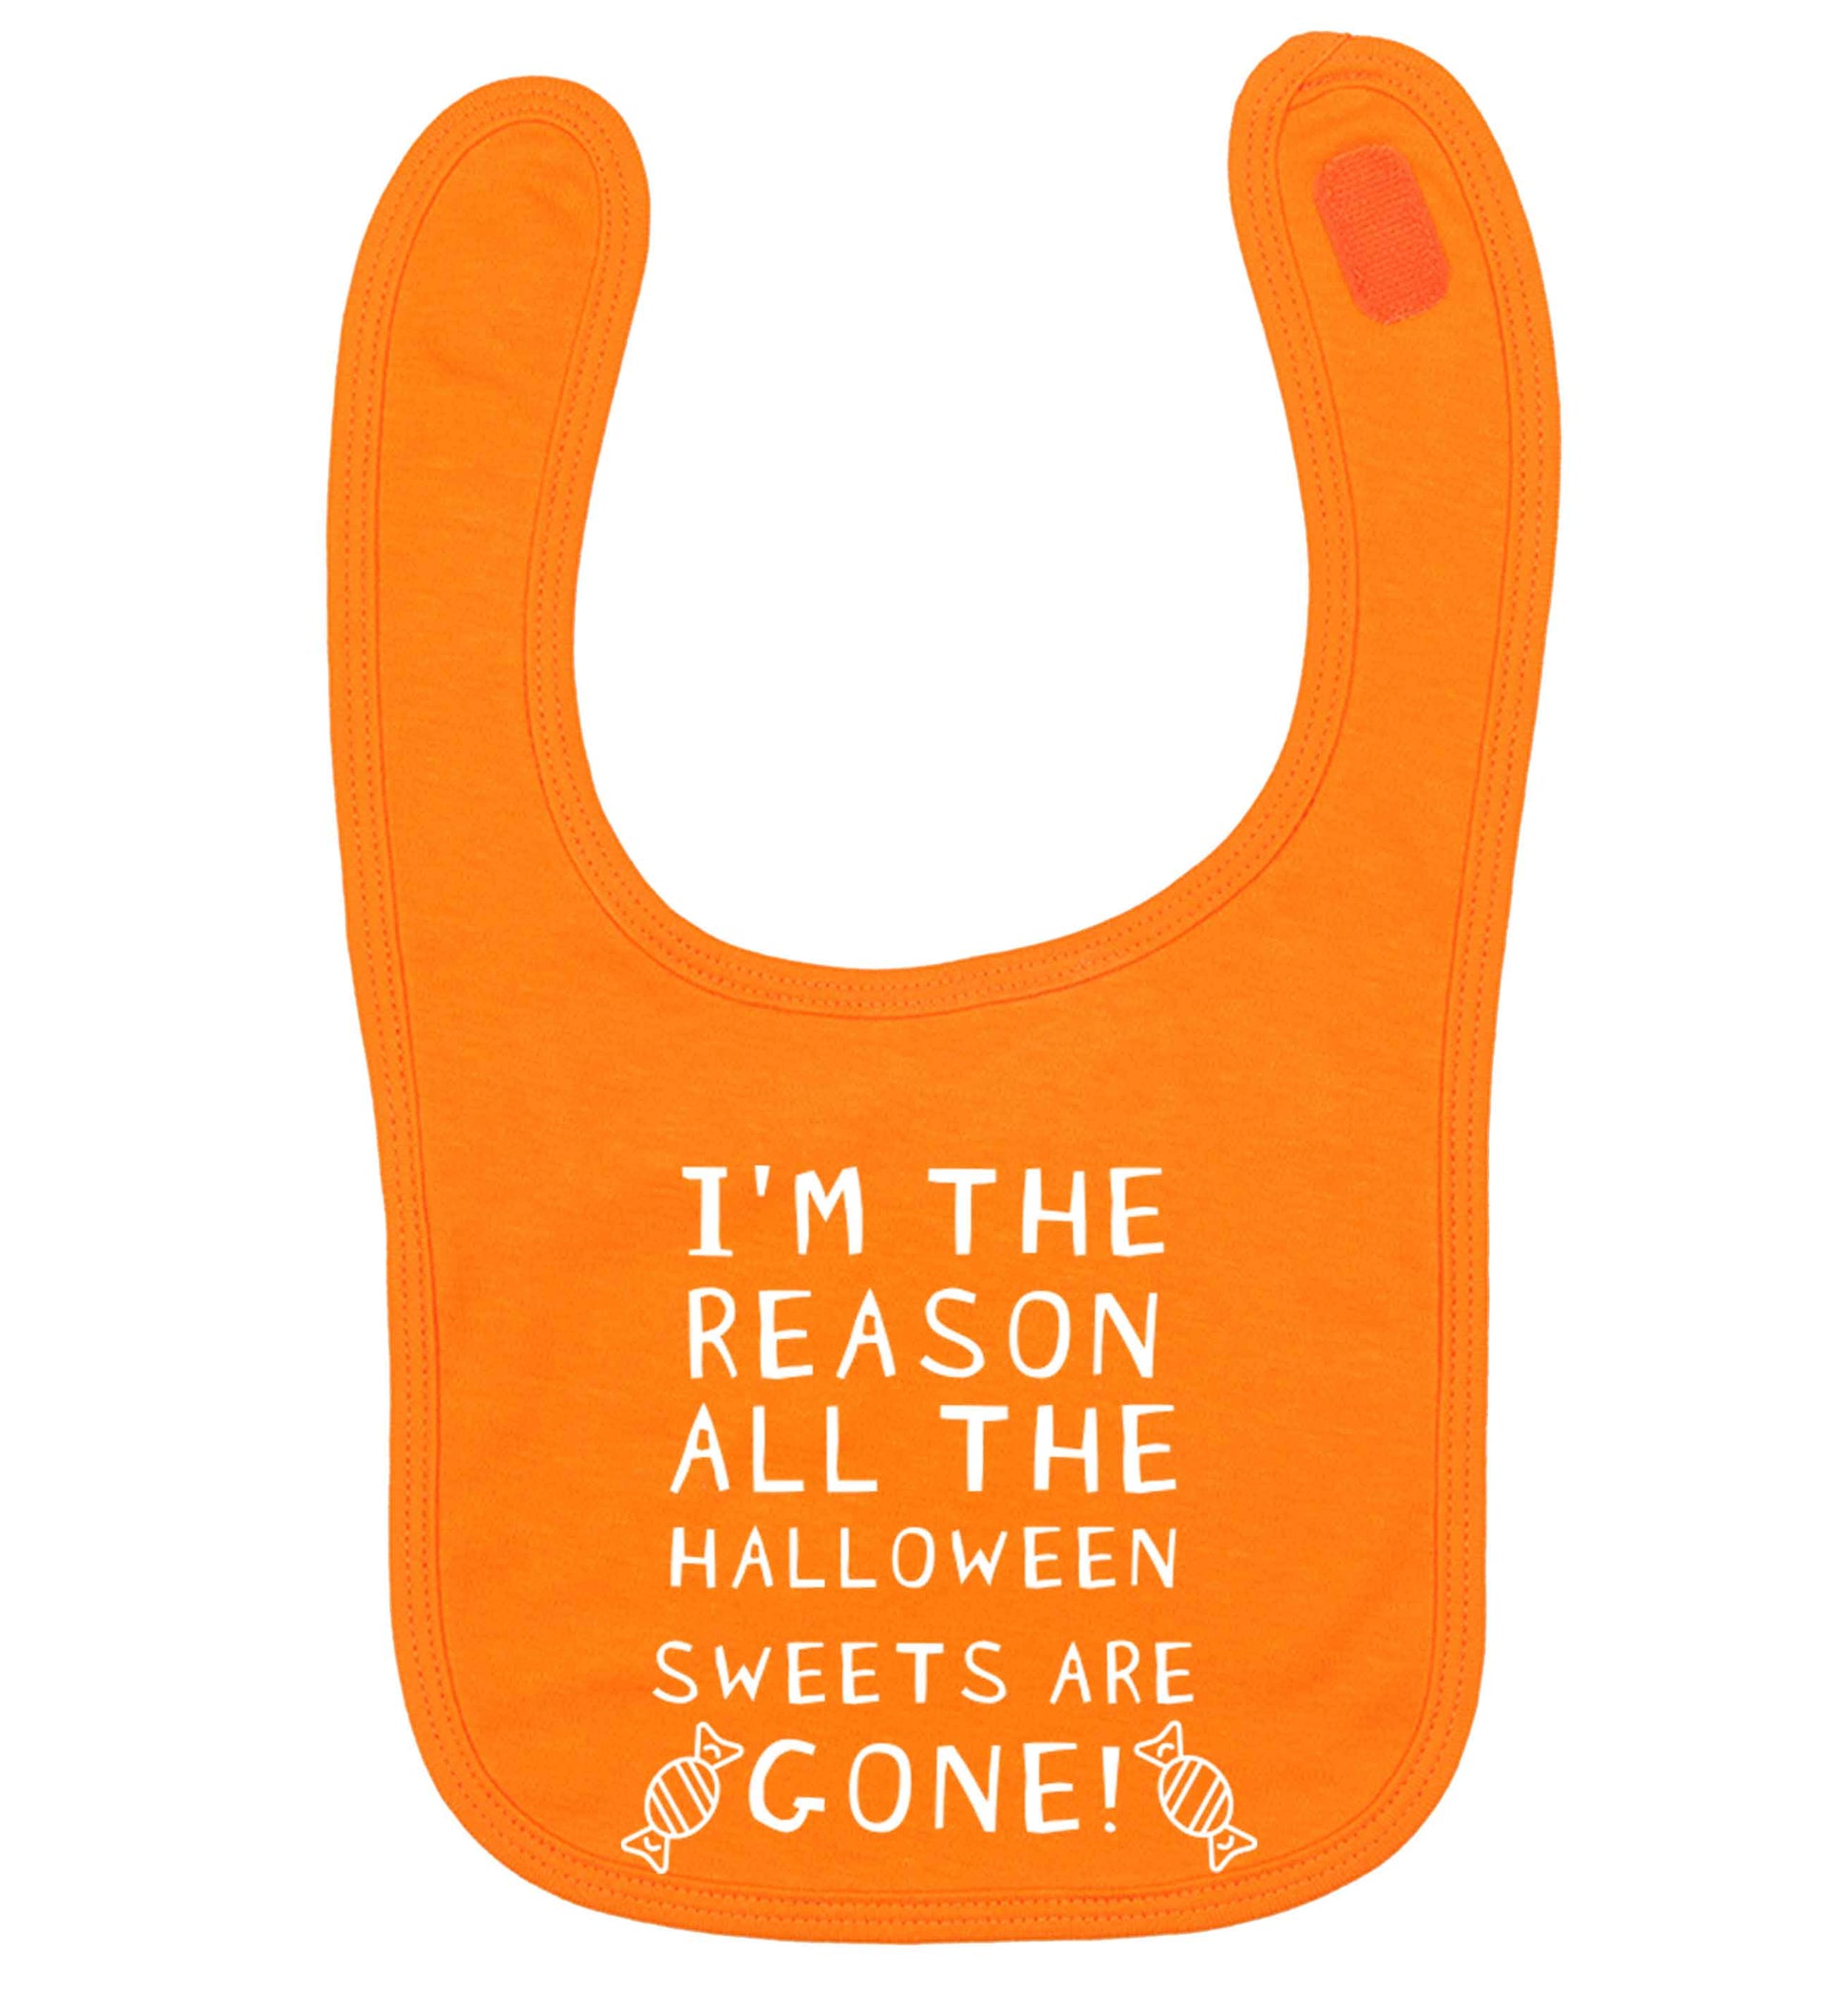 I'm the reason all of the halloween sweets are gone orange baby bib